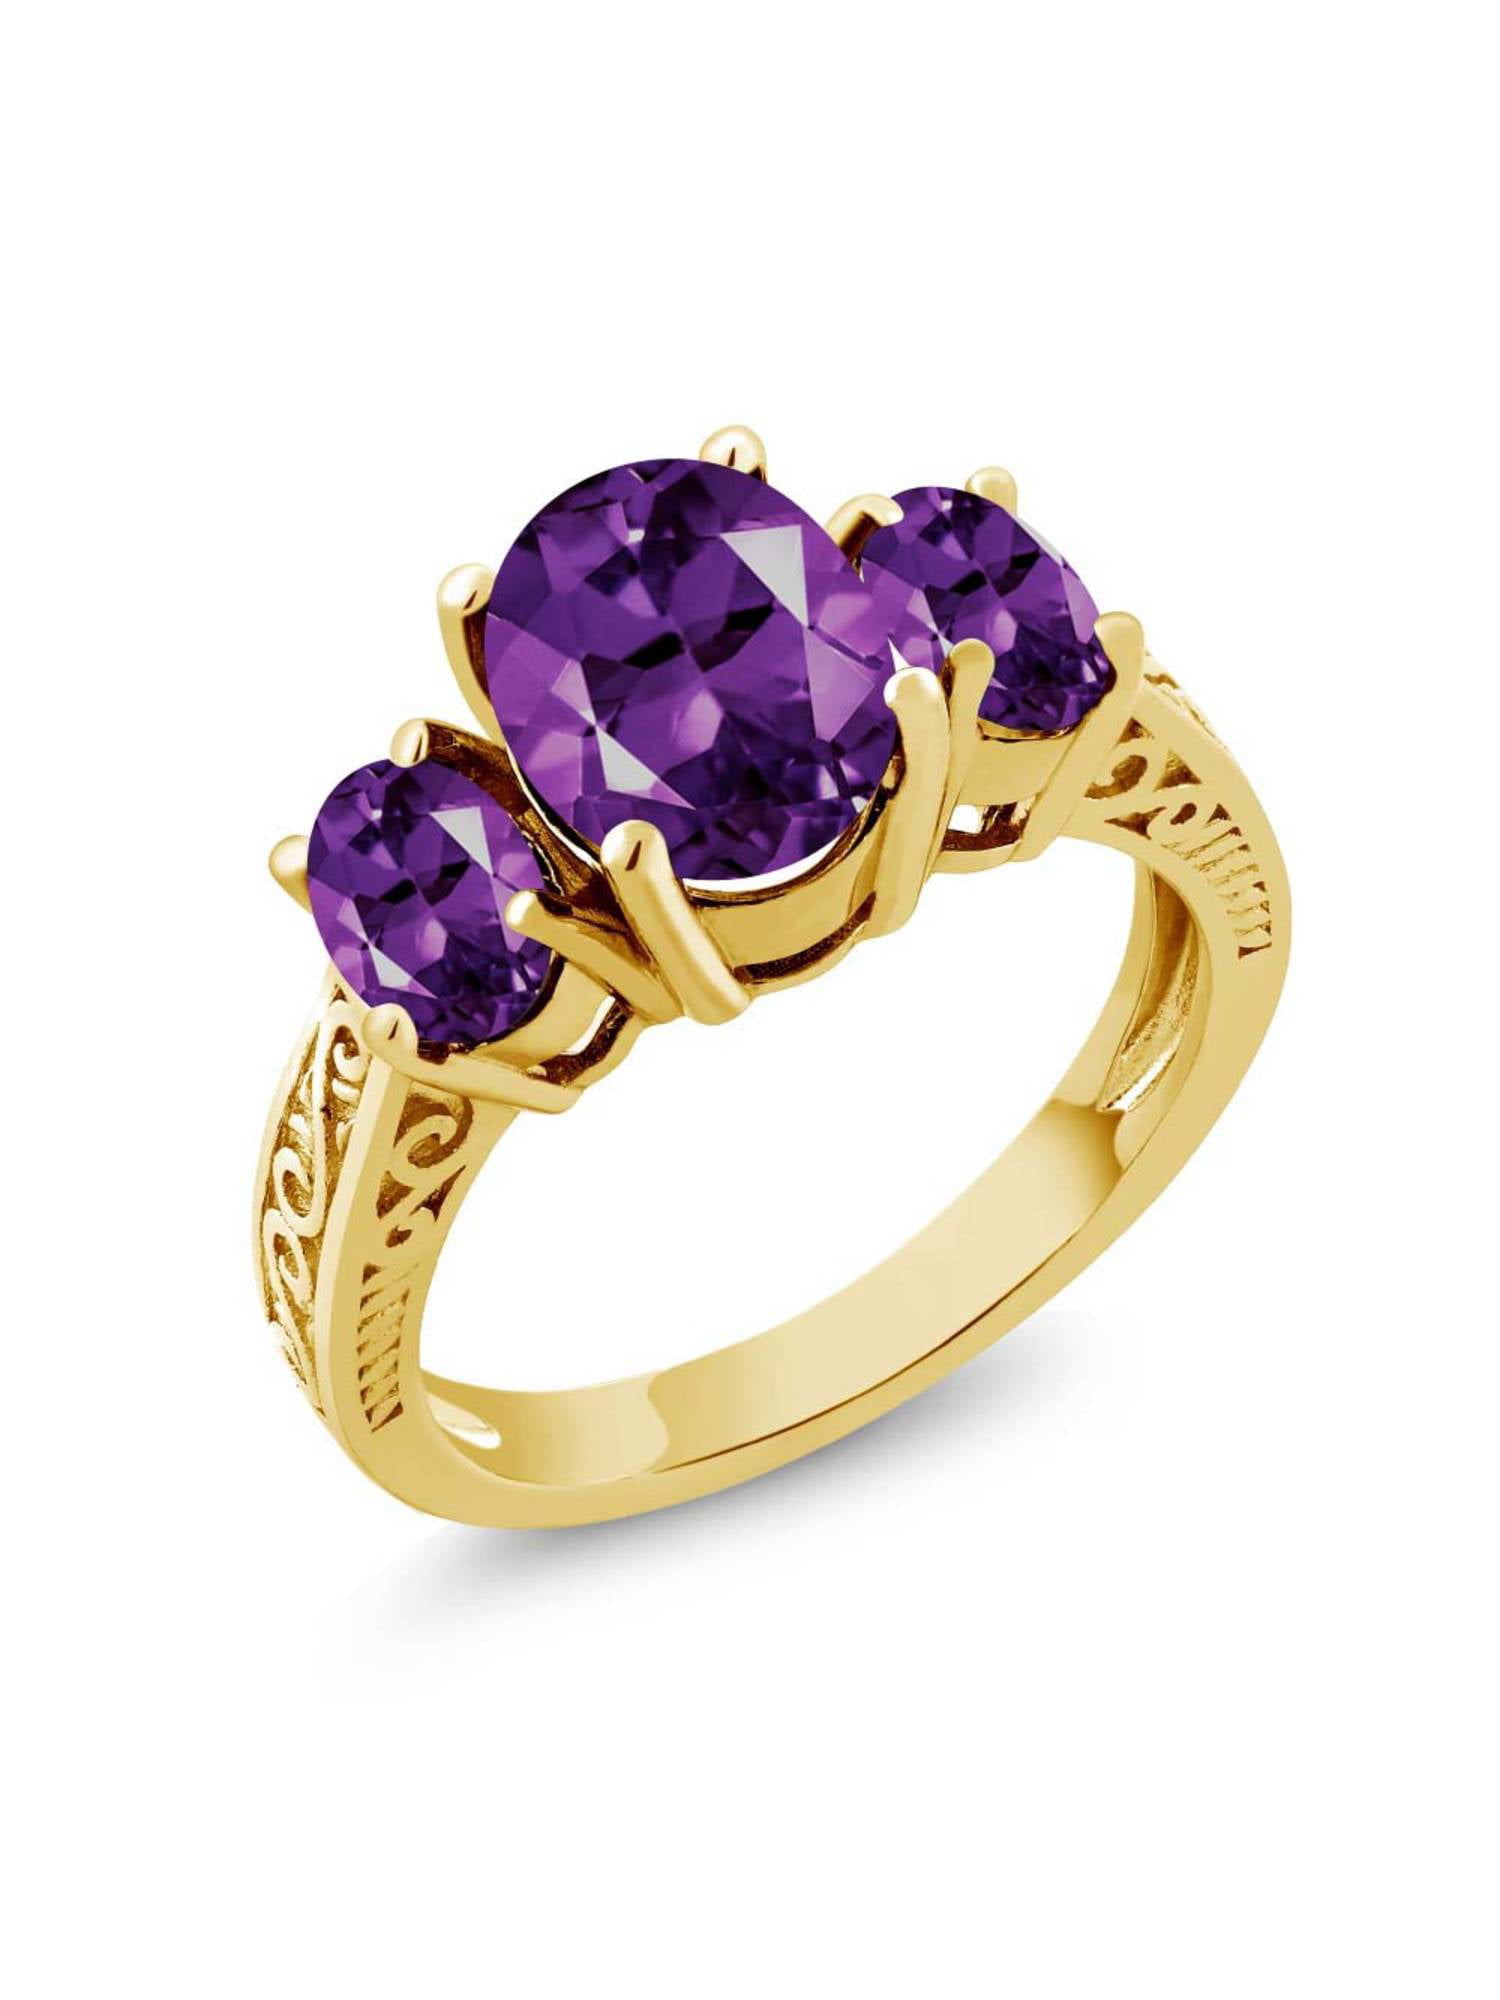 Gem Stone King - 2.56 Ct Oval Purple VS Amethyst 925 Yellow Gold Plated ...